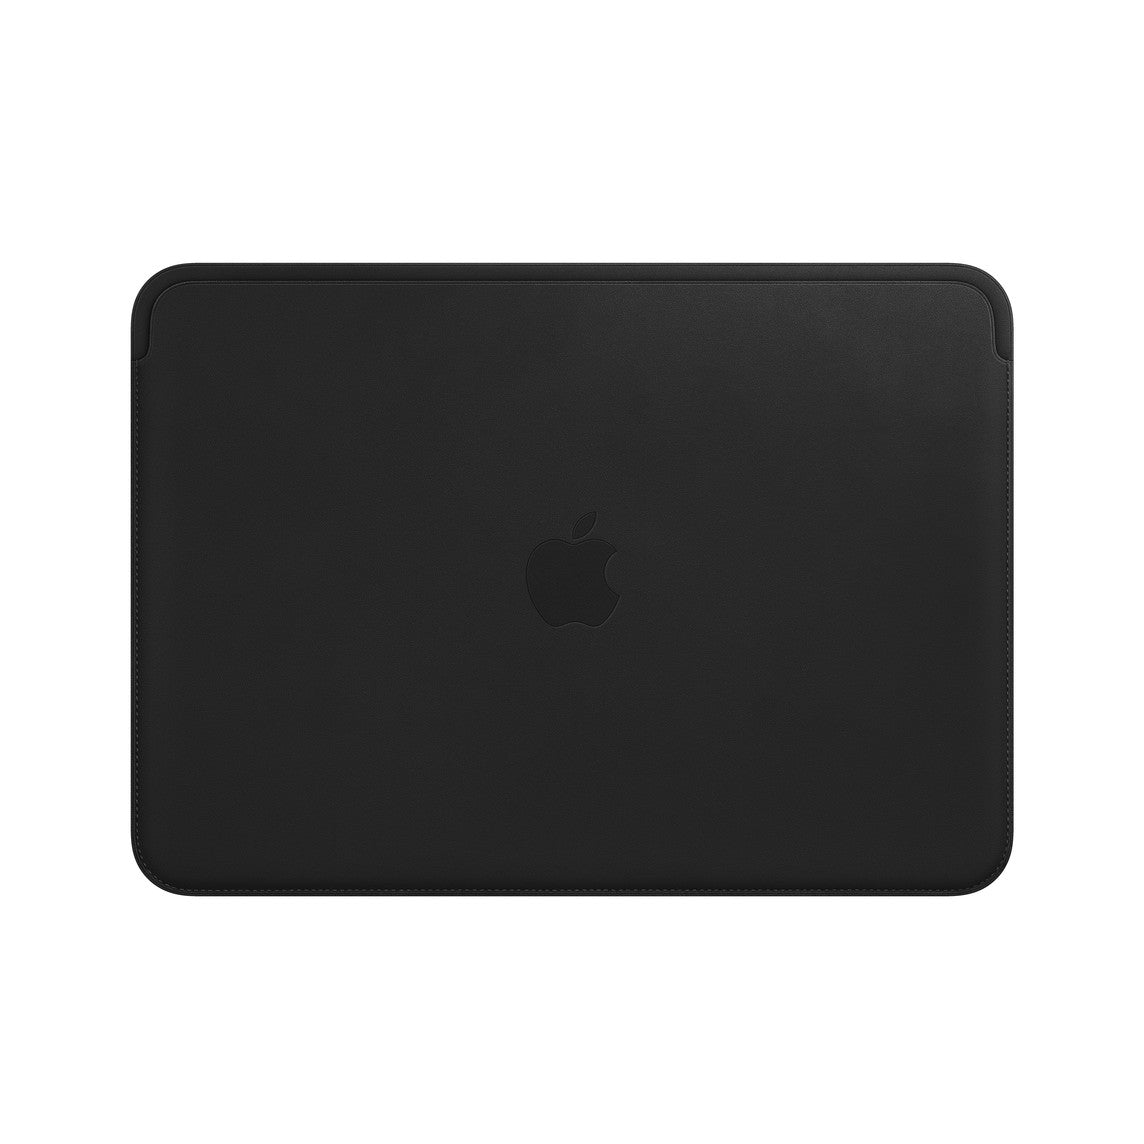 Apple MacBook Air and Pro 13in Leather Sleeve - Black Black New - Sealed